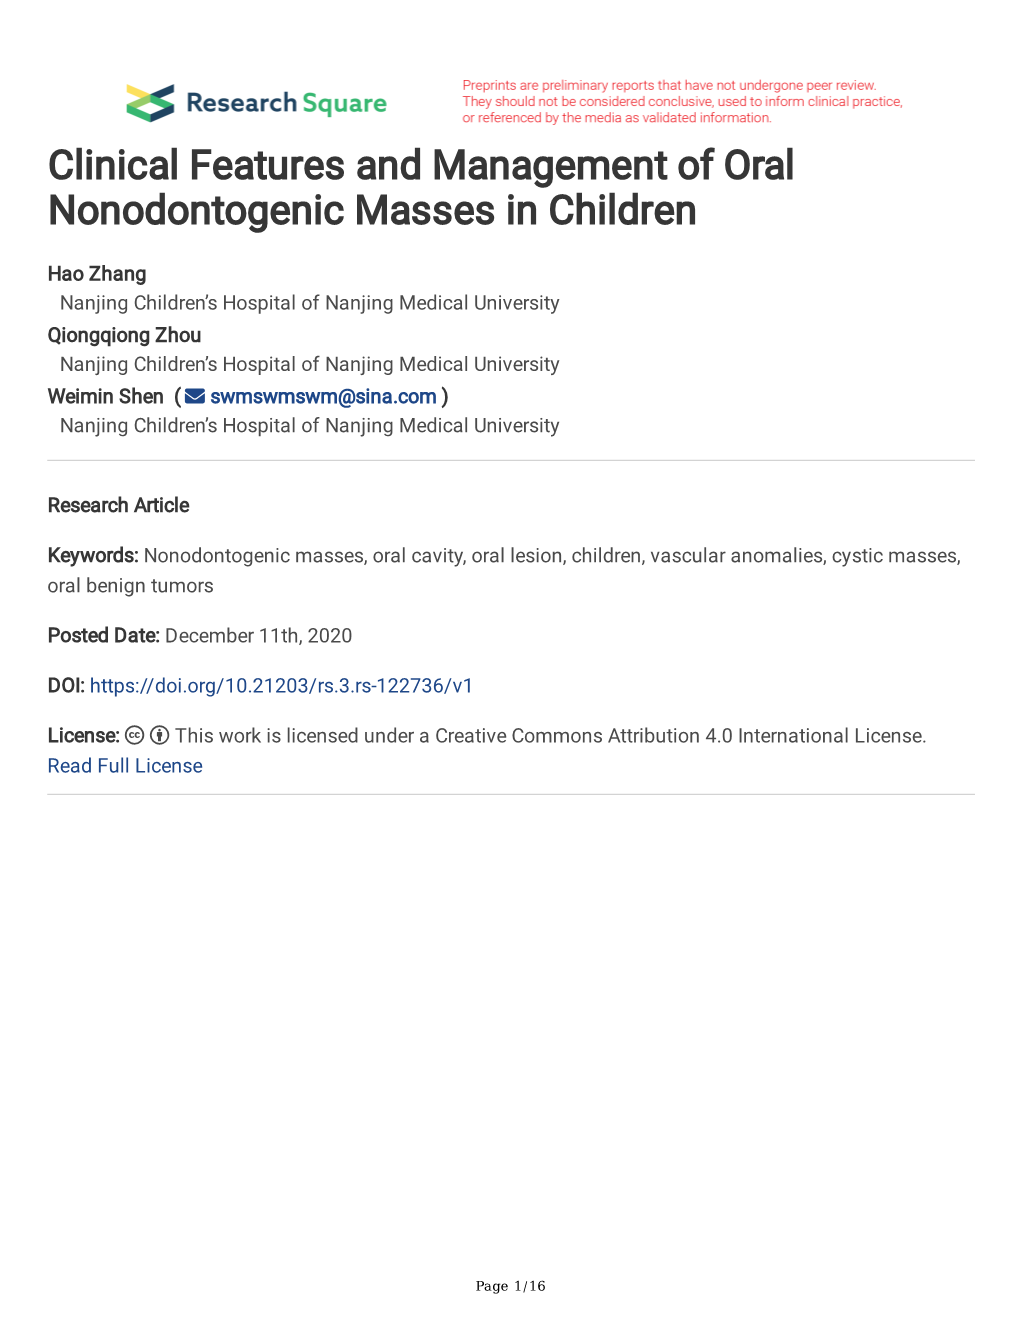 Clinical Features and Management of Oral Nonodontogenic Masses in Children